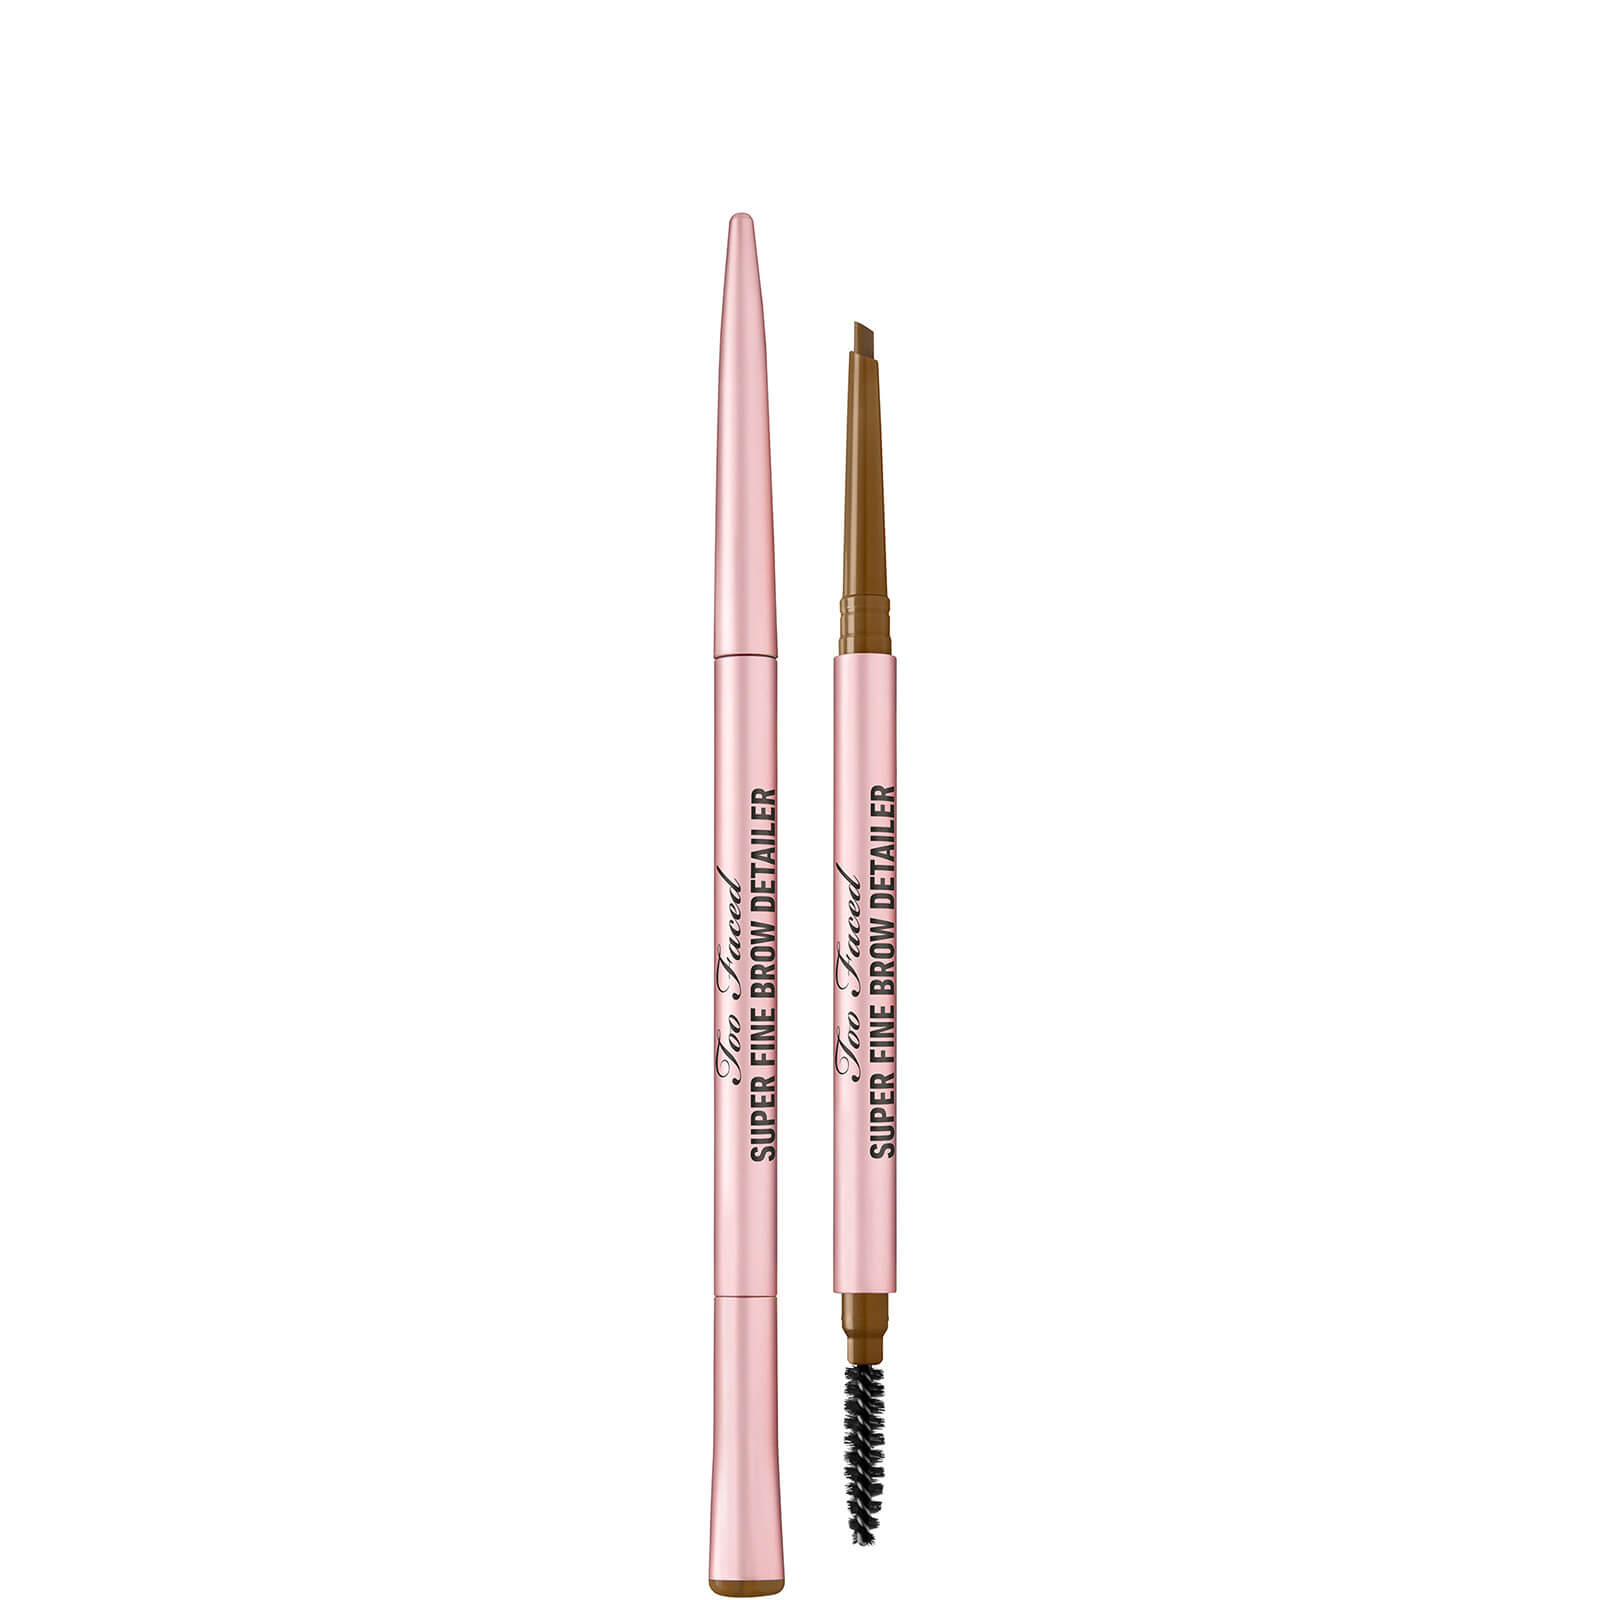 Image of Too Faced Superfine Brow Detailer Ultra Slim Brow Pencil 0.08g (Various Shades) - Medium Brown